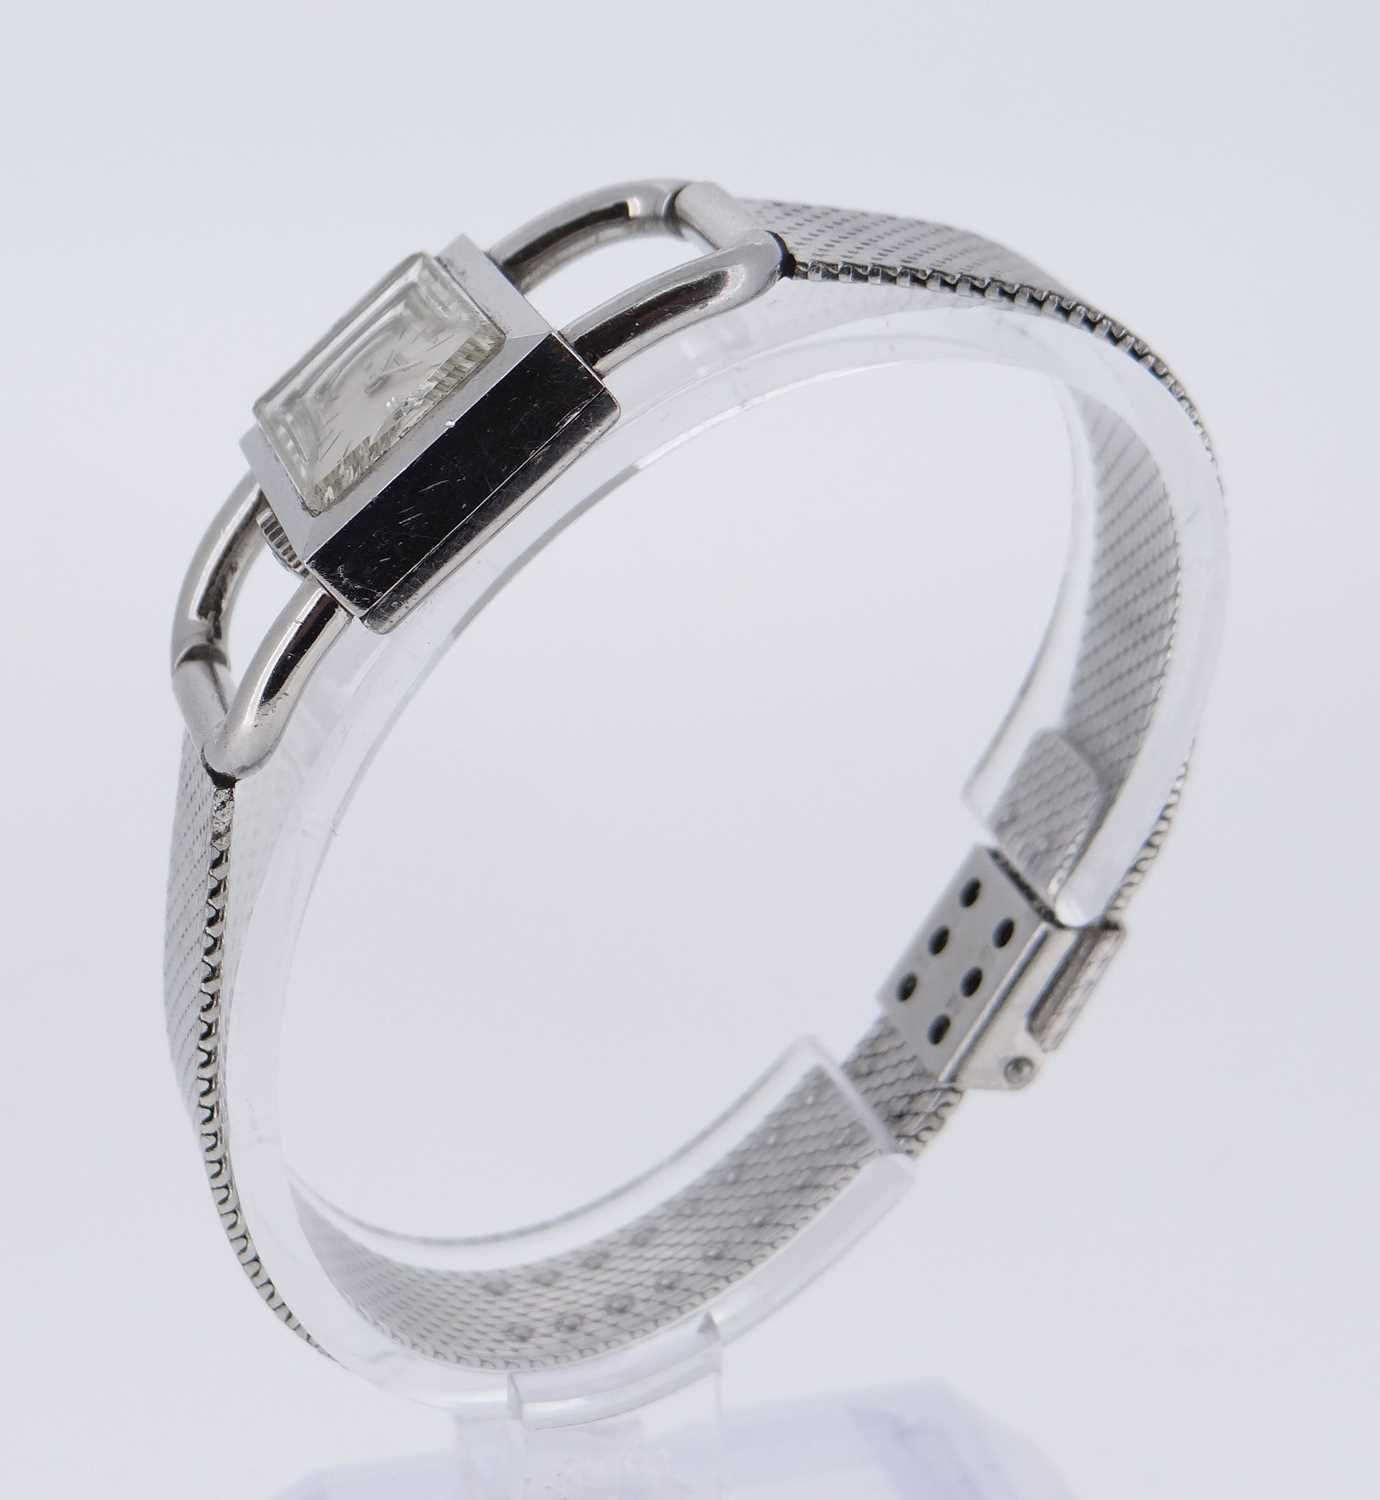 JAEGER LECOULTRE STAINLESS STEEL LADIES’ WRISTWATCH, c. 1965 - Image 3 of 6